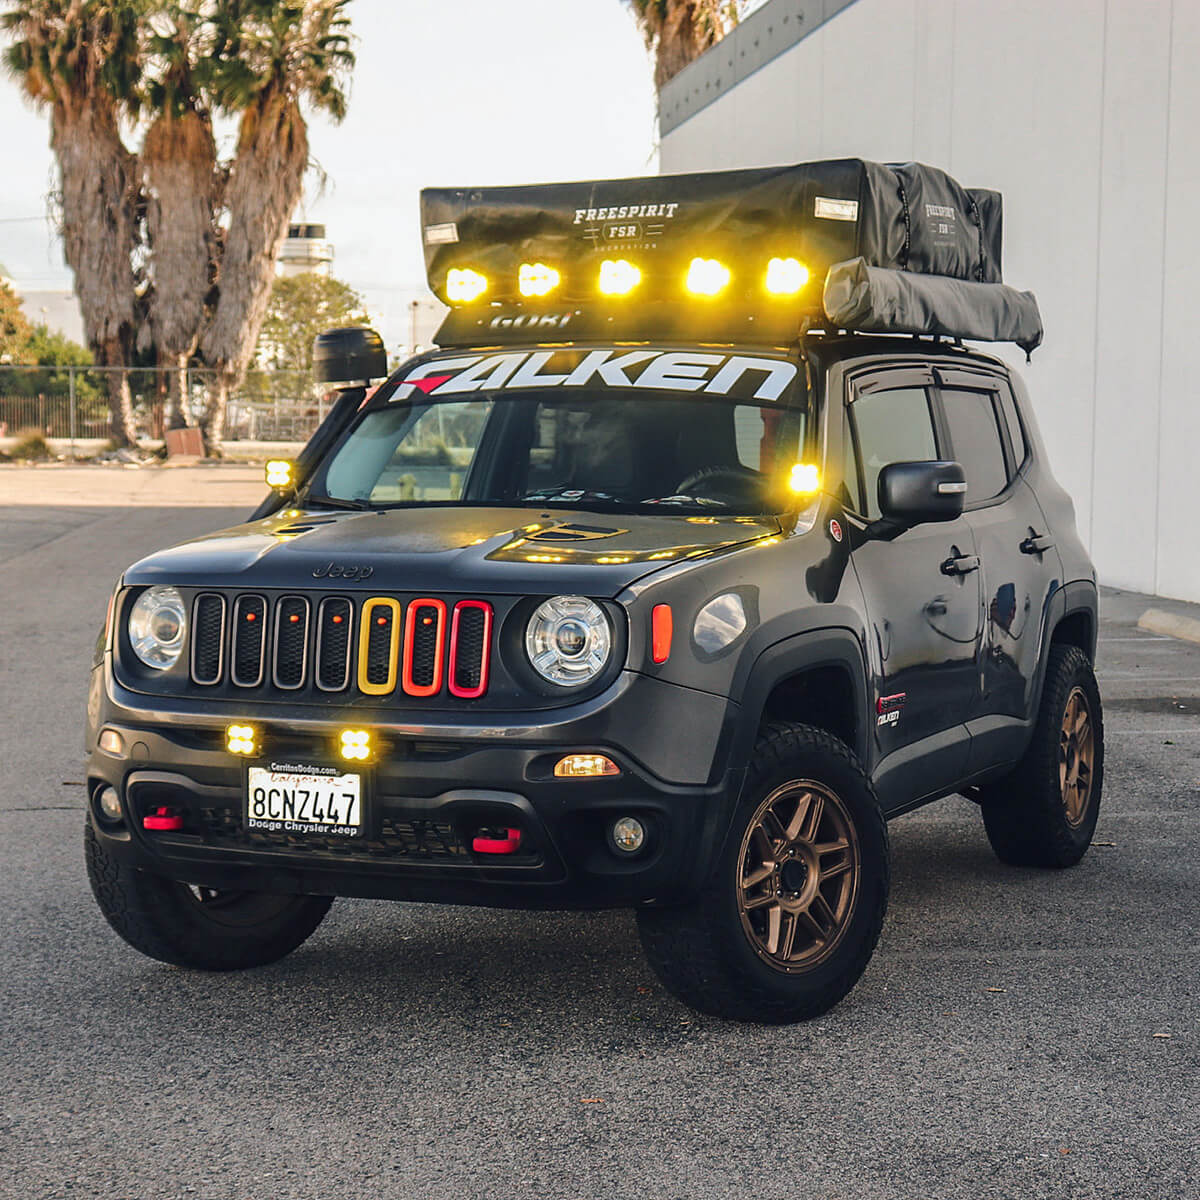 Lifted Jeep Renegade with off-road modifications